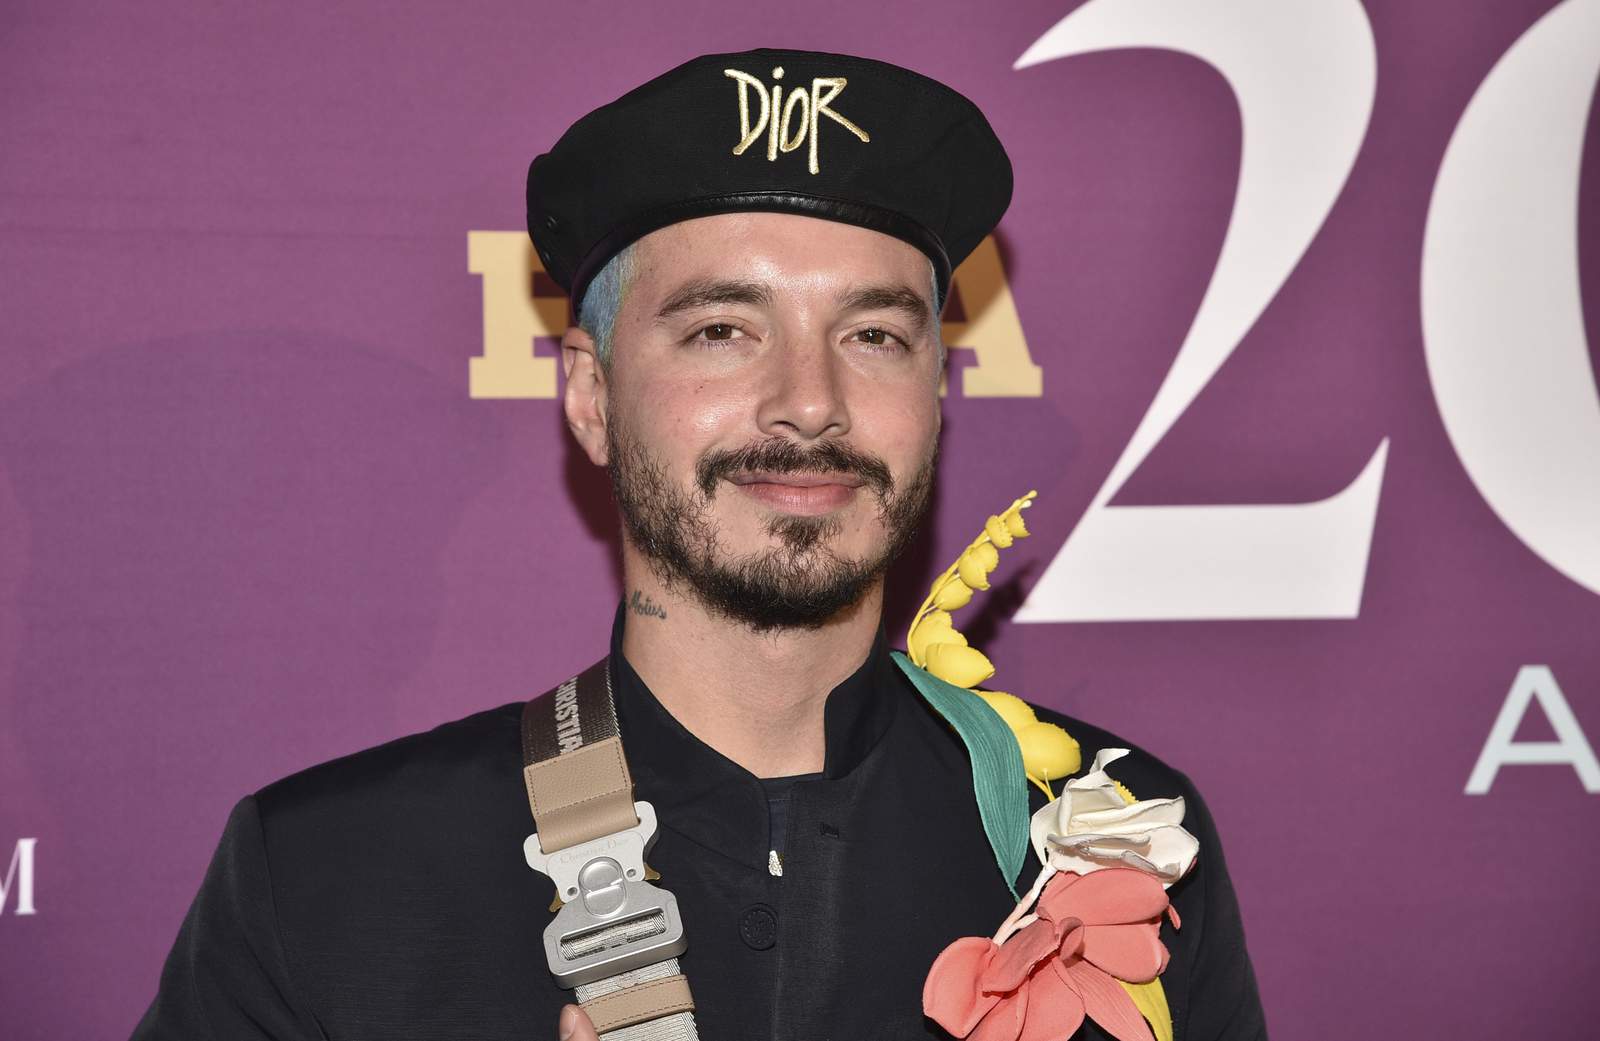 McDonald’s next move: a meal inspired by J Balvin